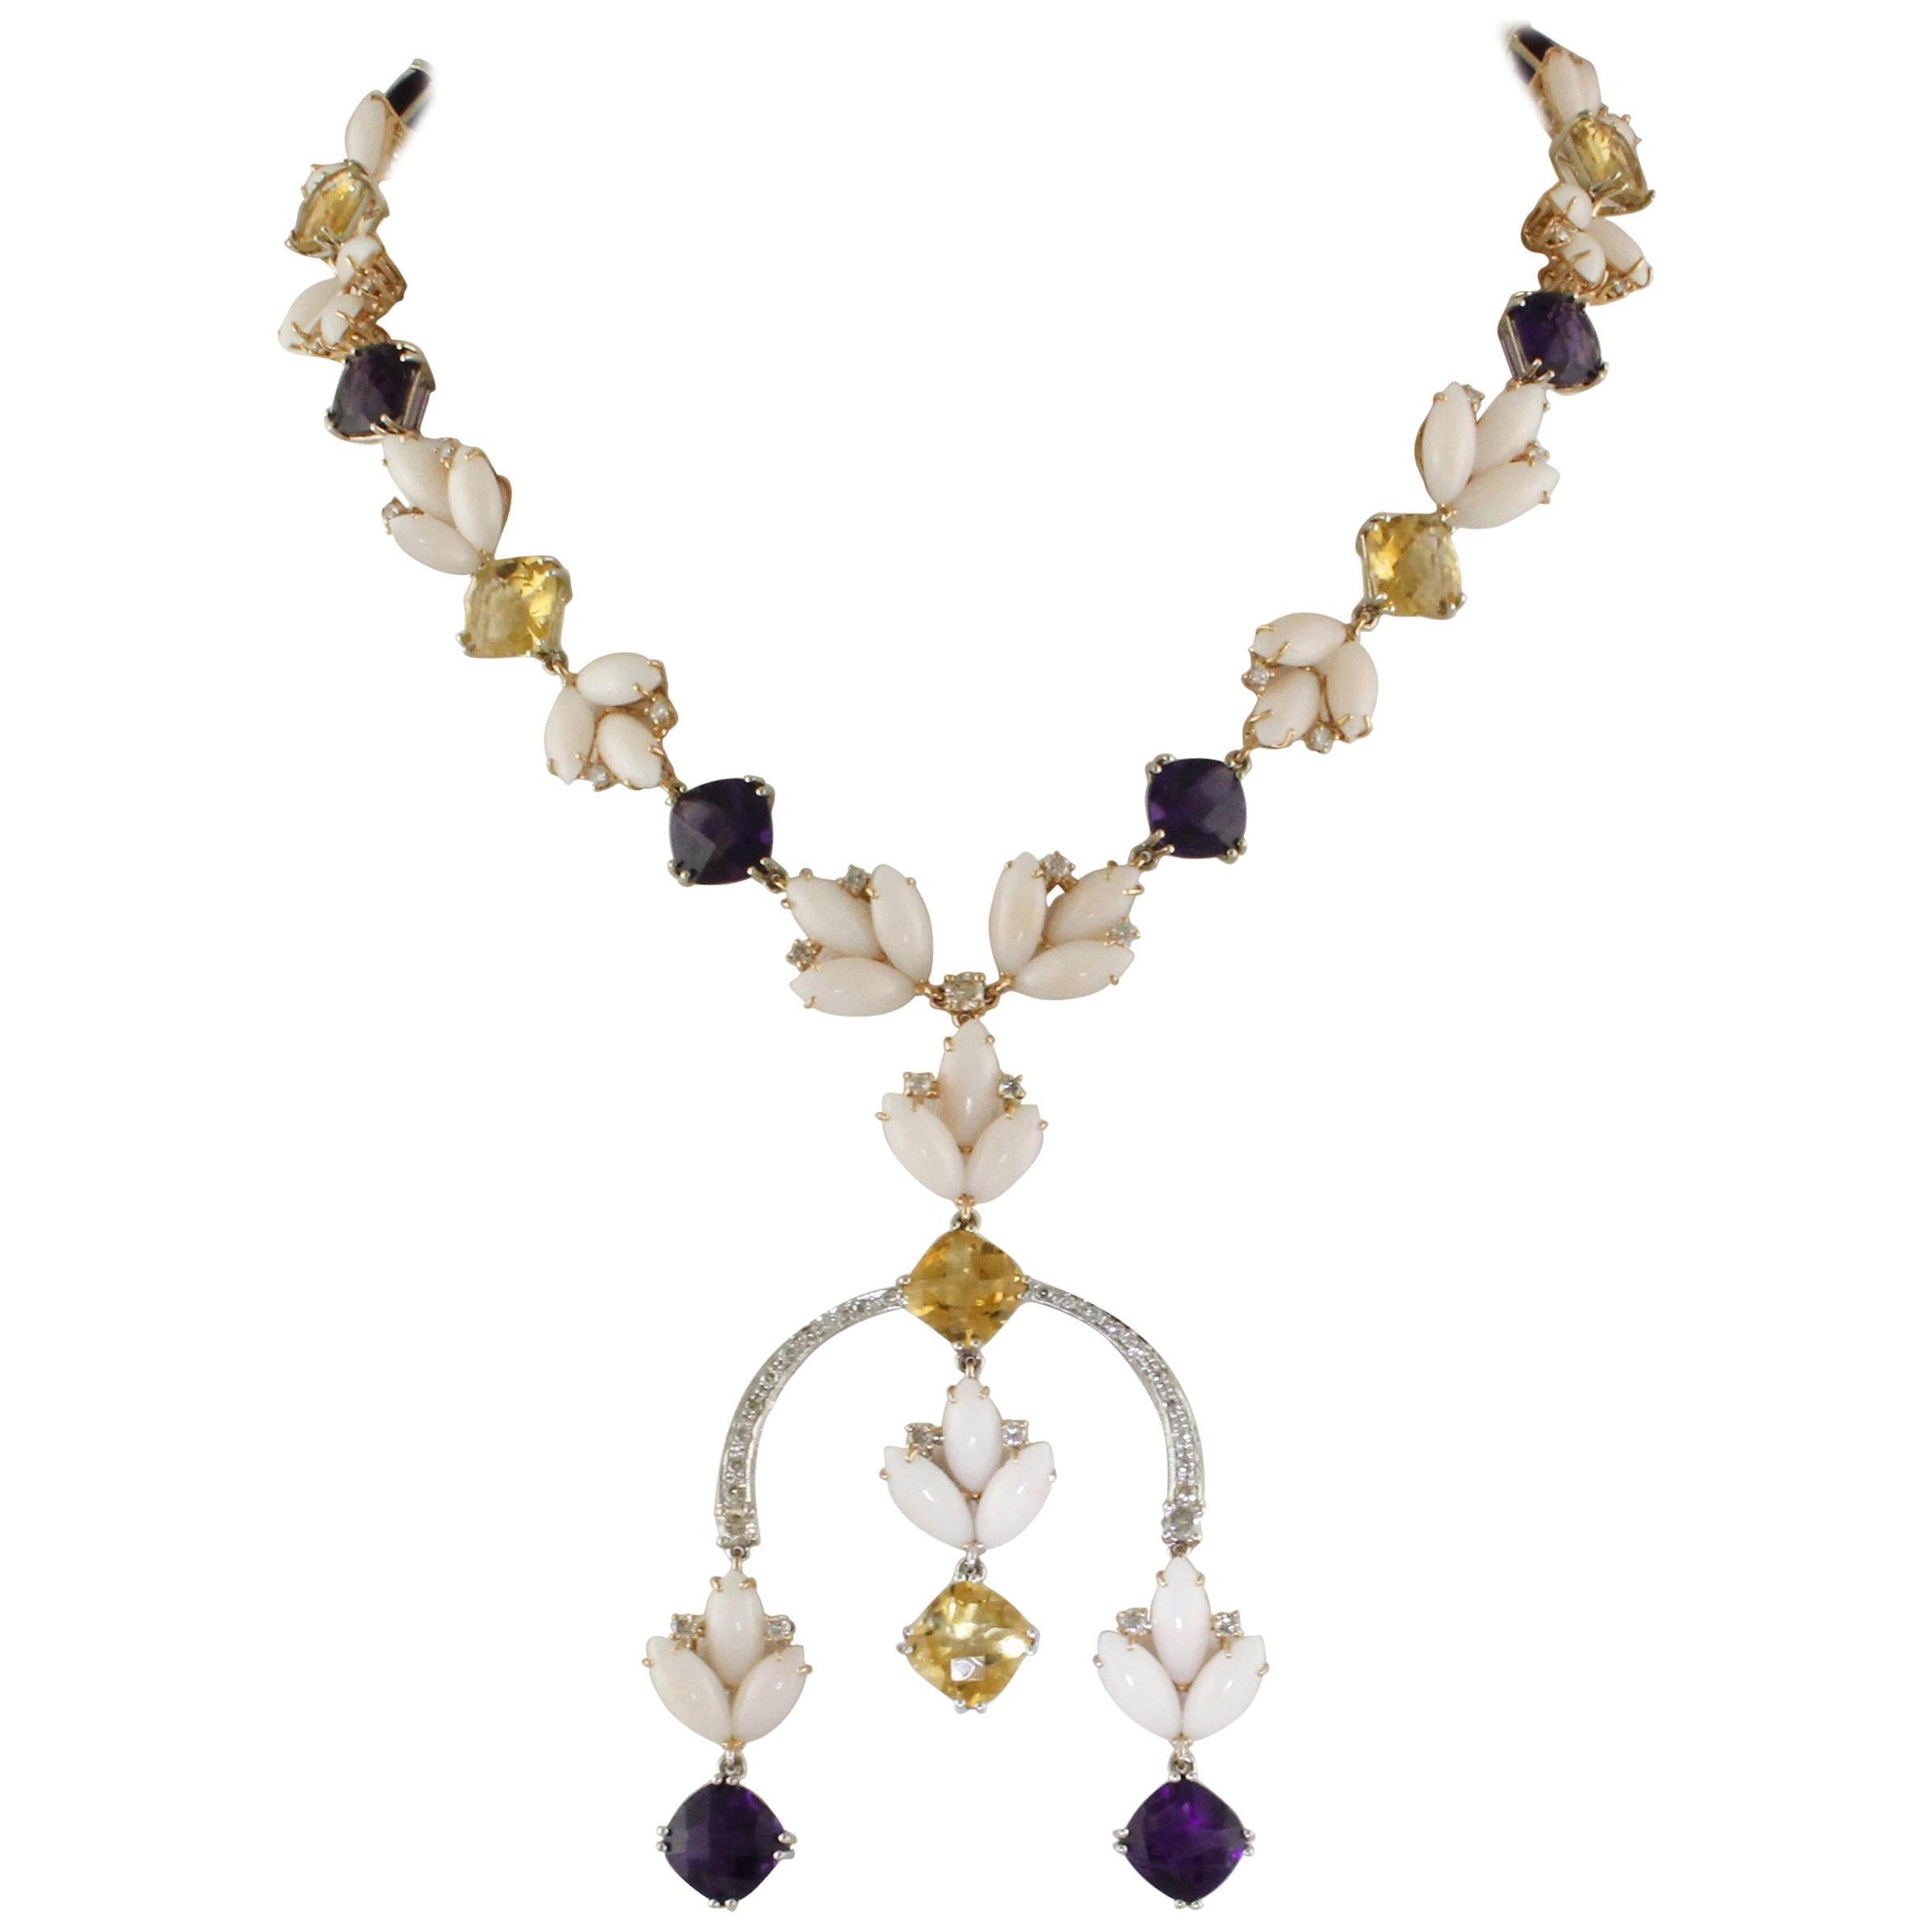 Diamonds, Amethysts,Topazes Pink Corals Drops White and Rose Gold Link Necklace